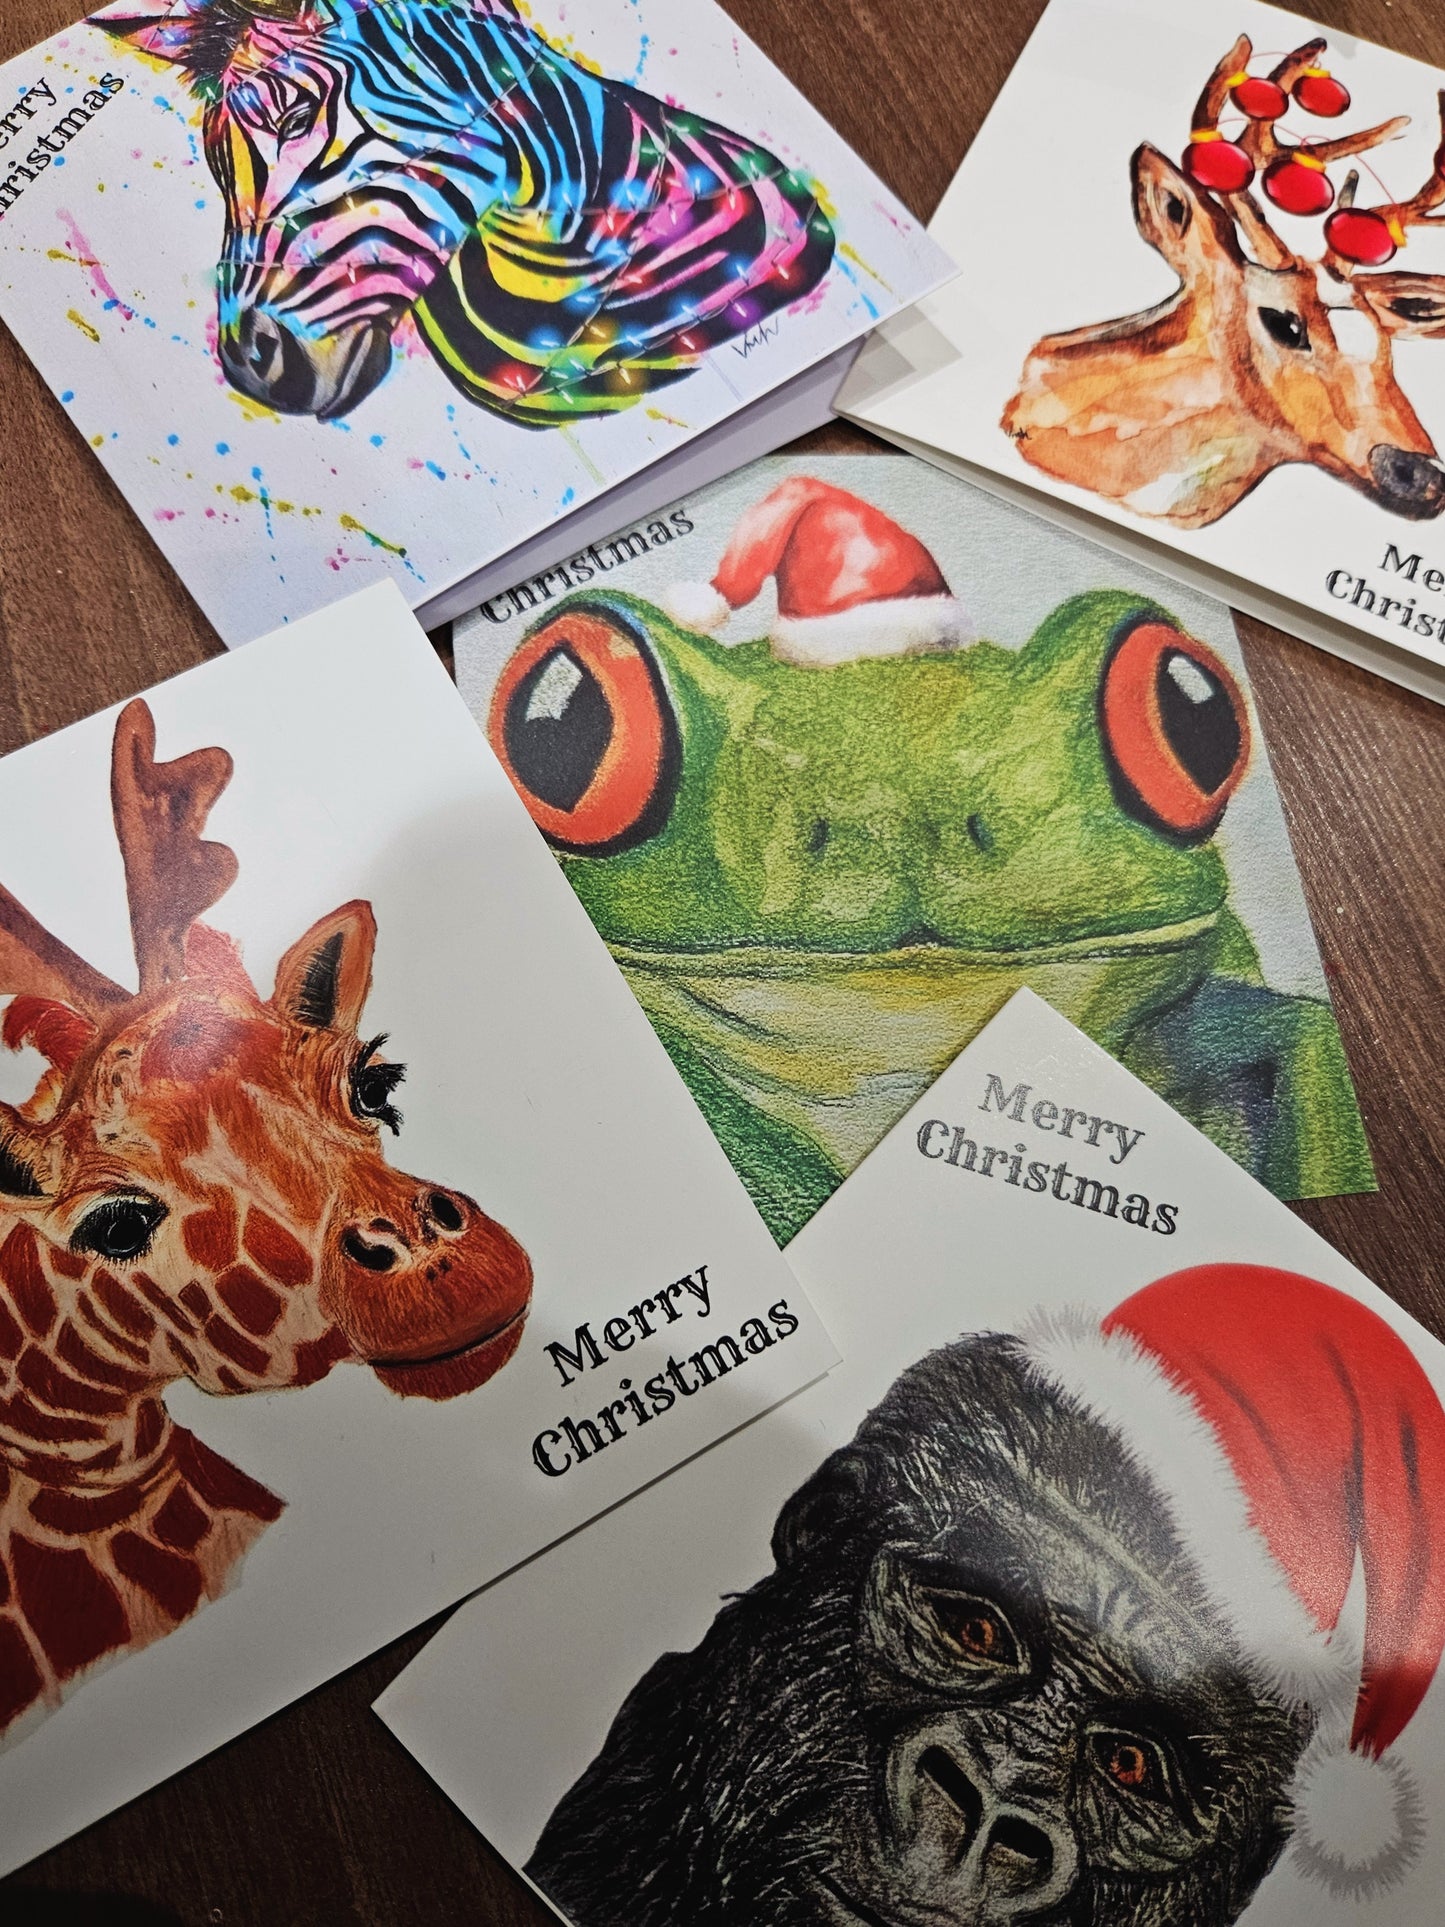 Art Charity Christmas Cards, with all profit made being donated to The Samaritans.